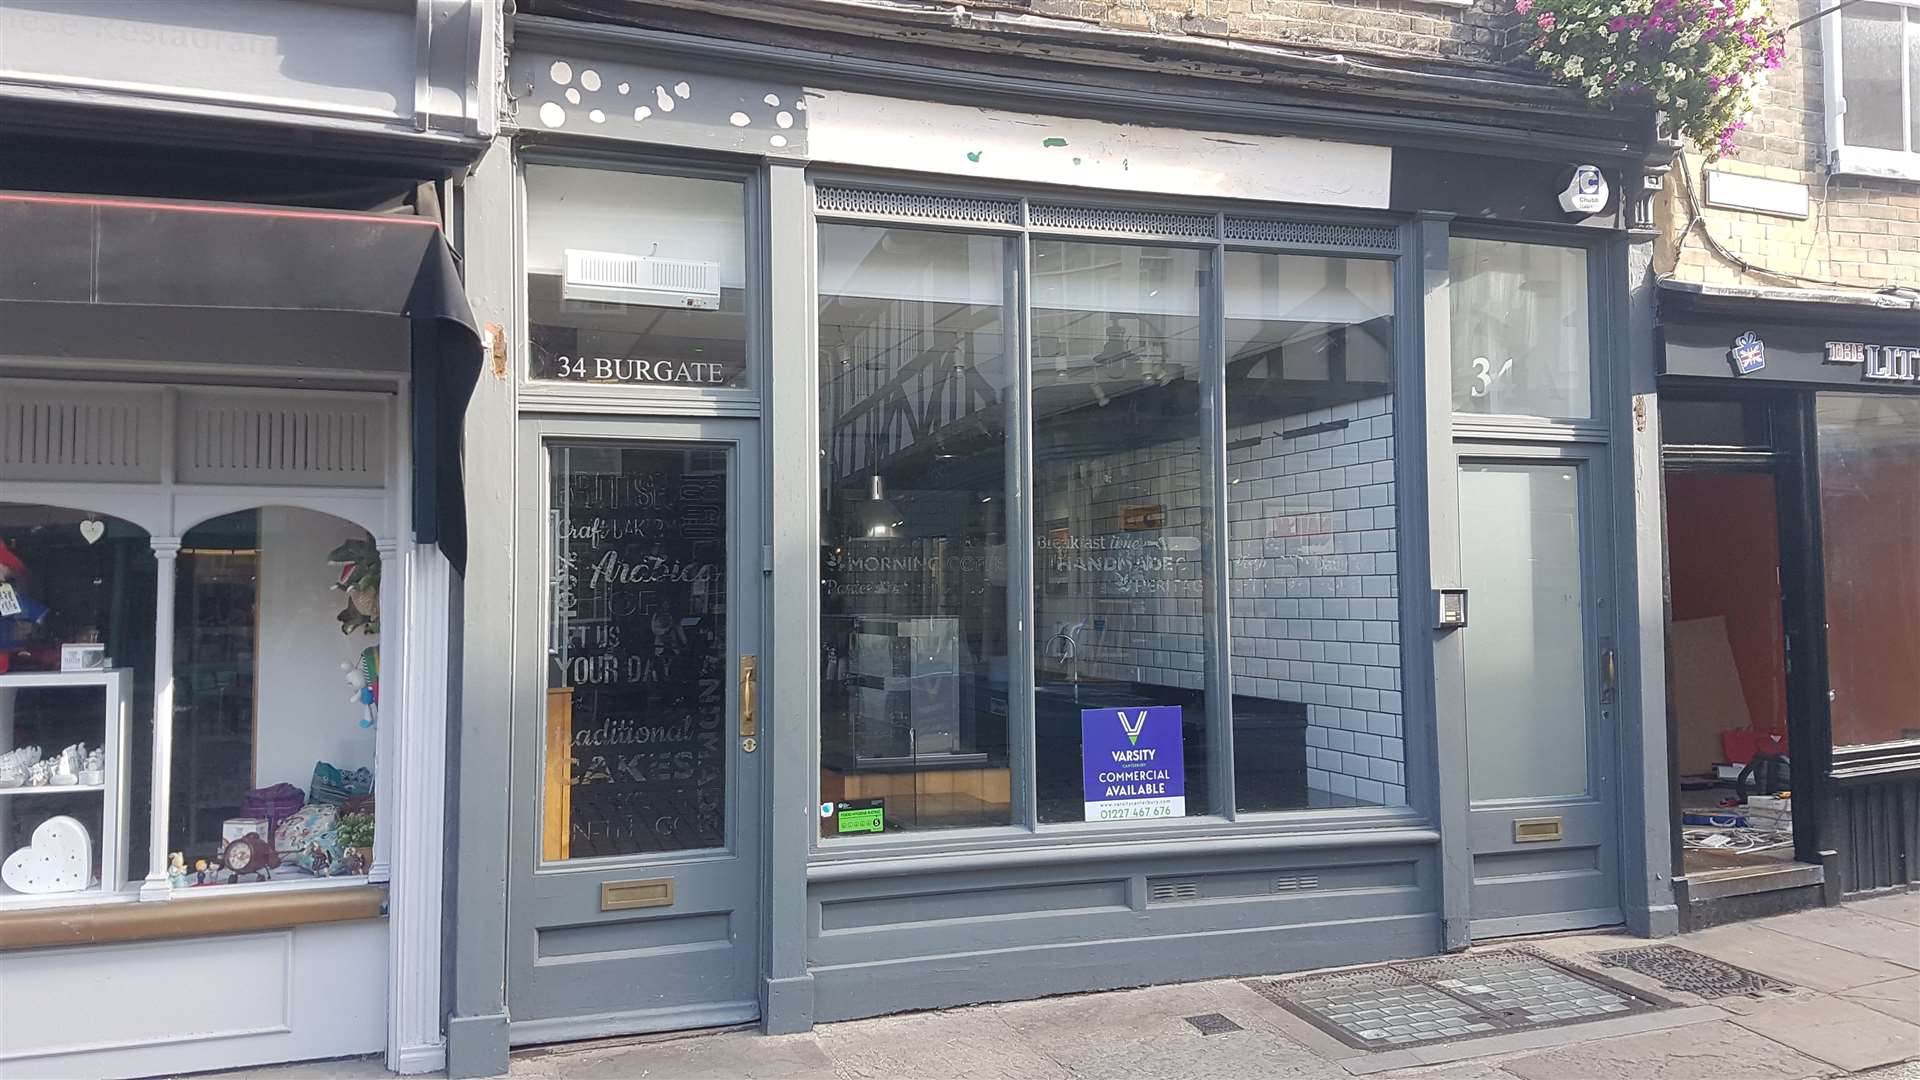 The Canterbury bakery in Burgate has been stripped back